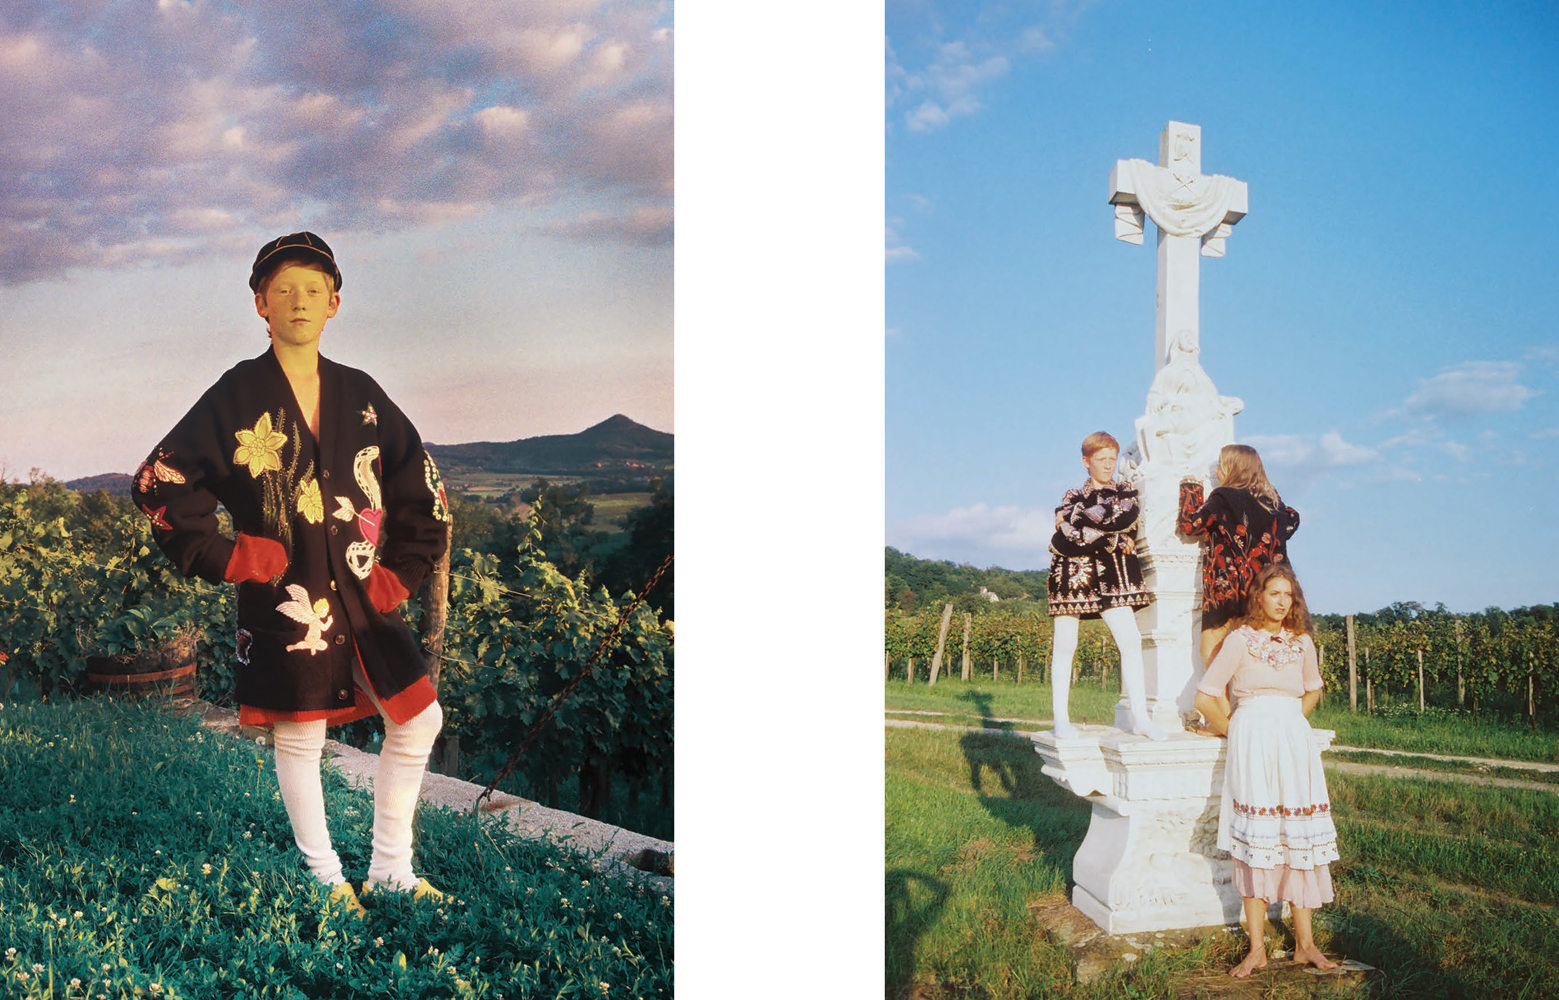 Dan Thawley | A Magazine Curated by Alessandro Michele | 109